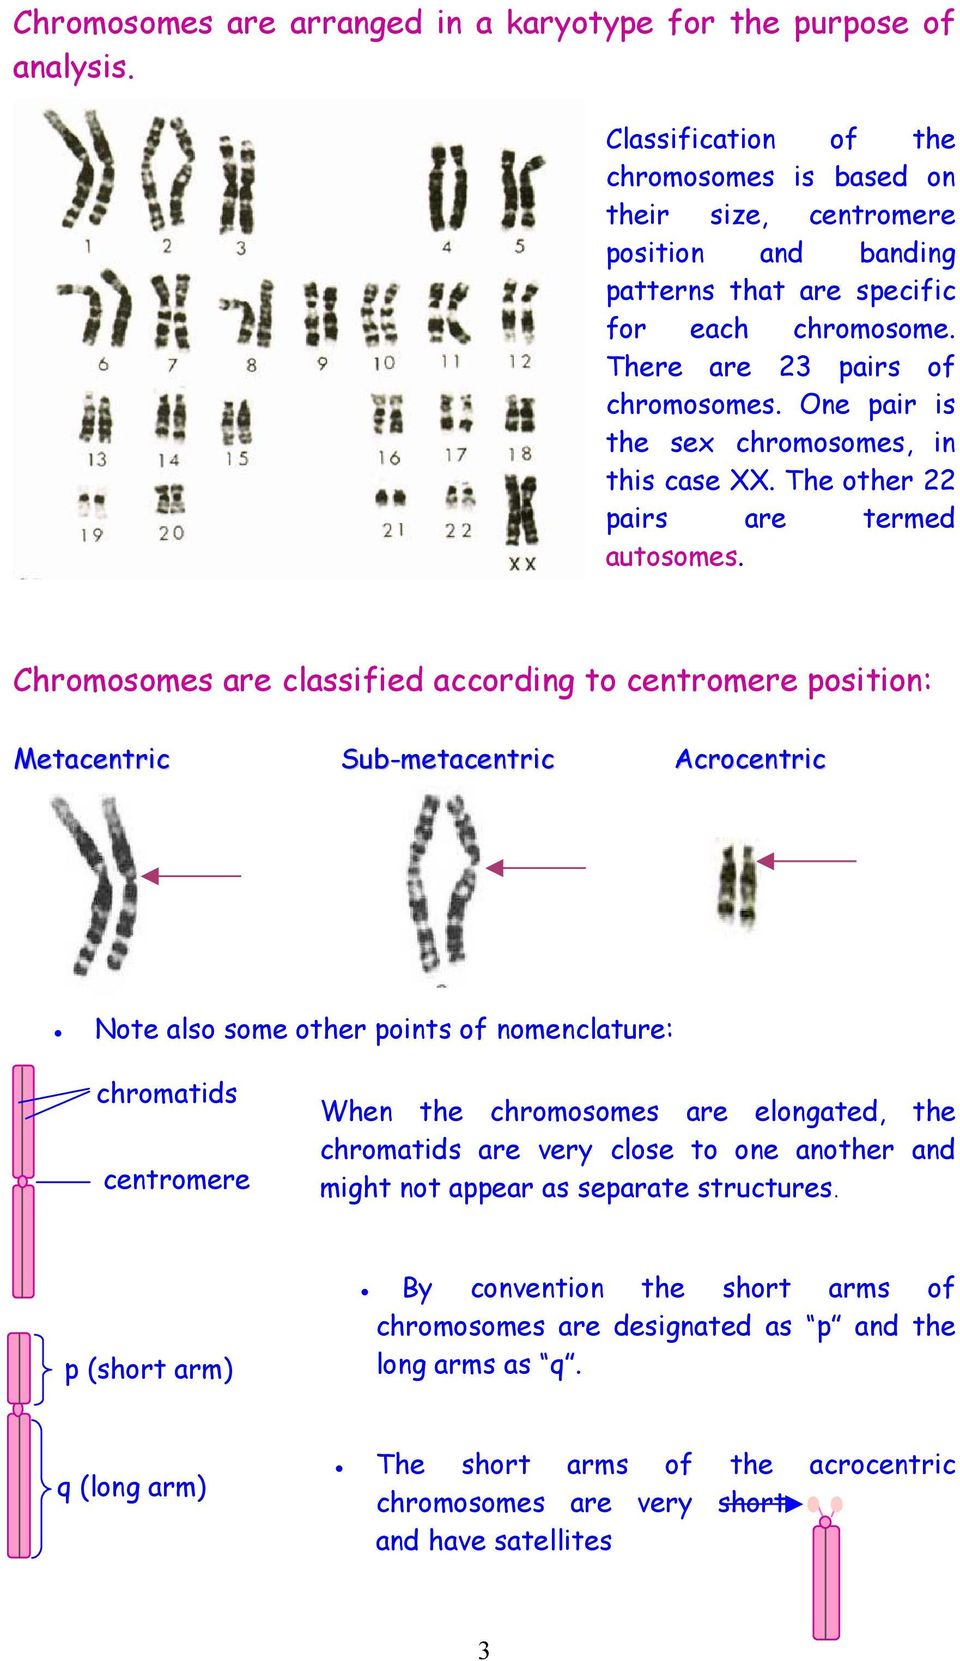 One pair is the sex chromosomes, in this case XX. The other 22 pairs are termed autosomes.